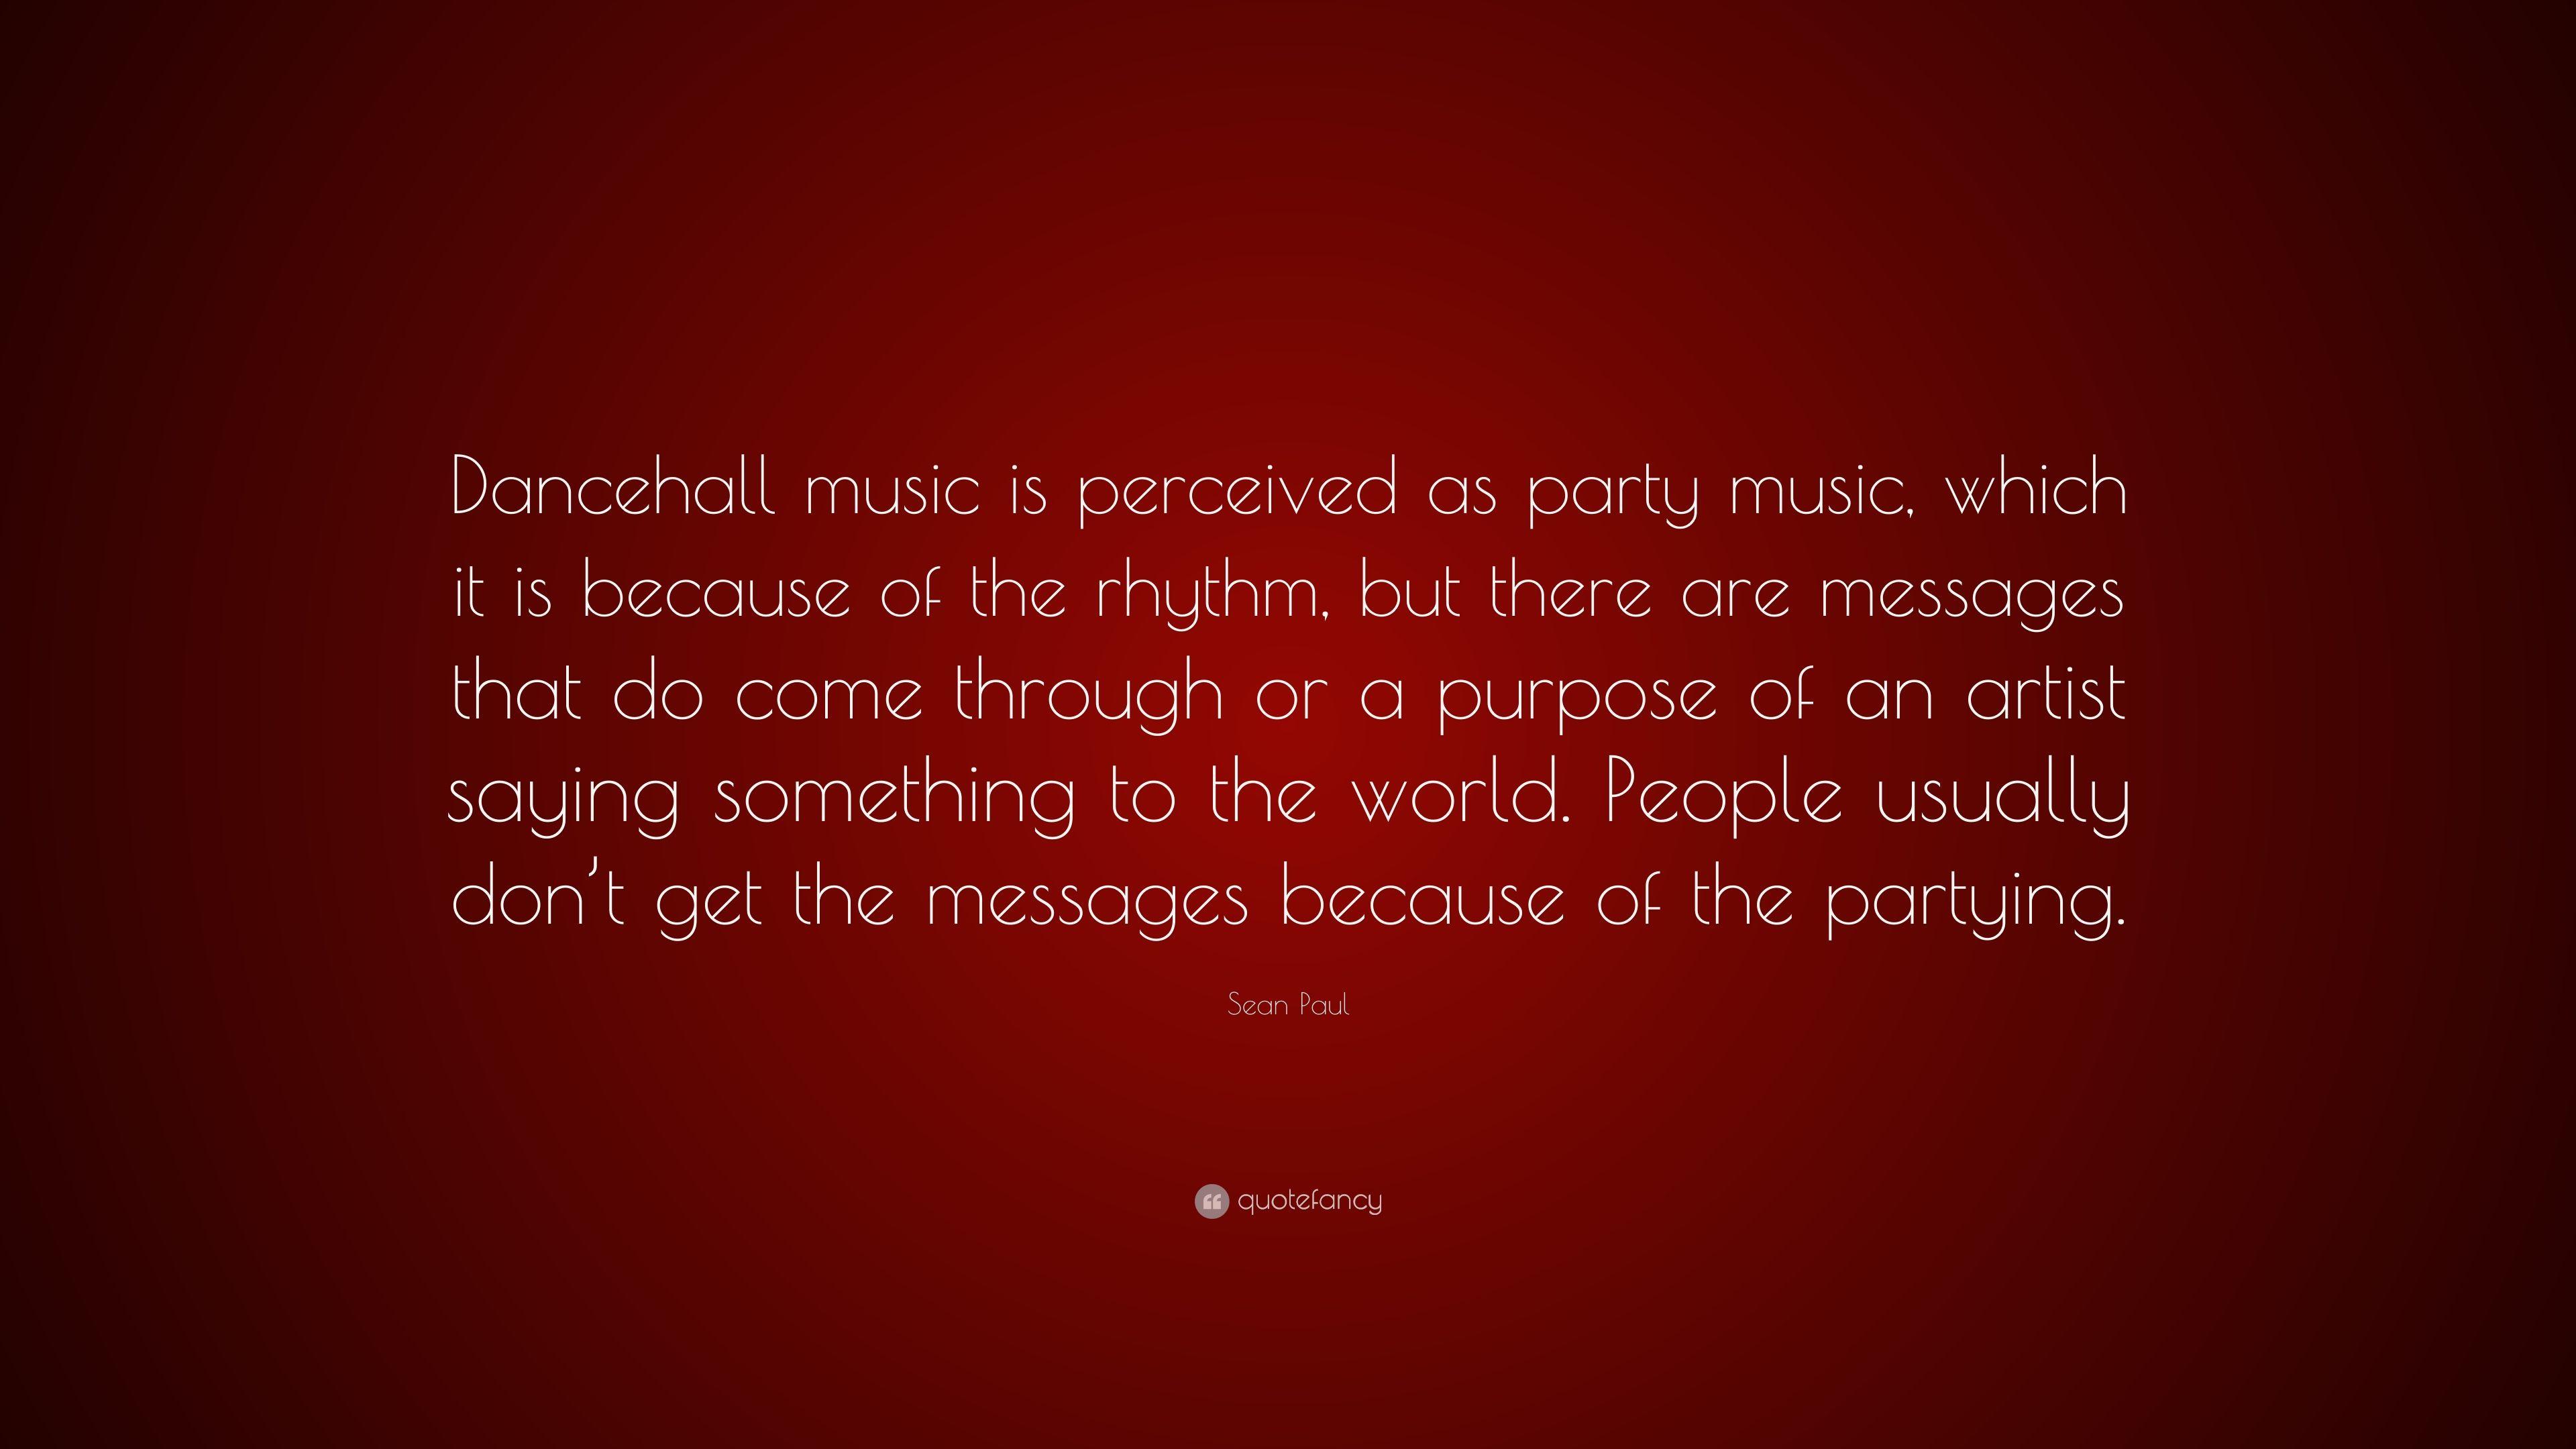 Sean Paul Quote: “Dancehall music is perceived as party music, which